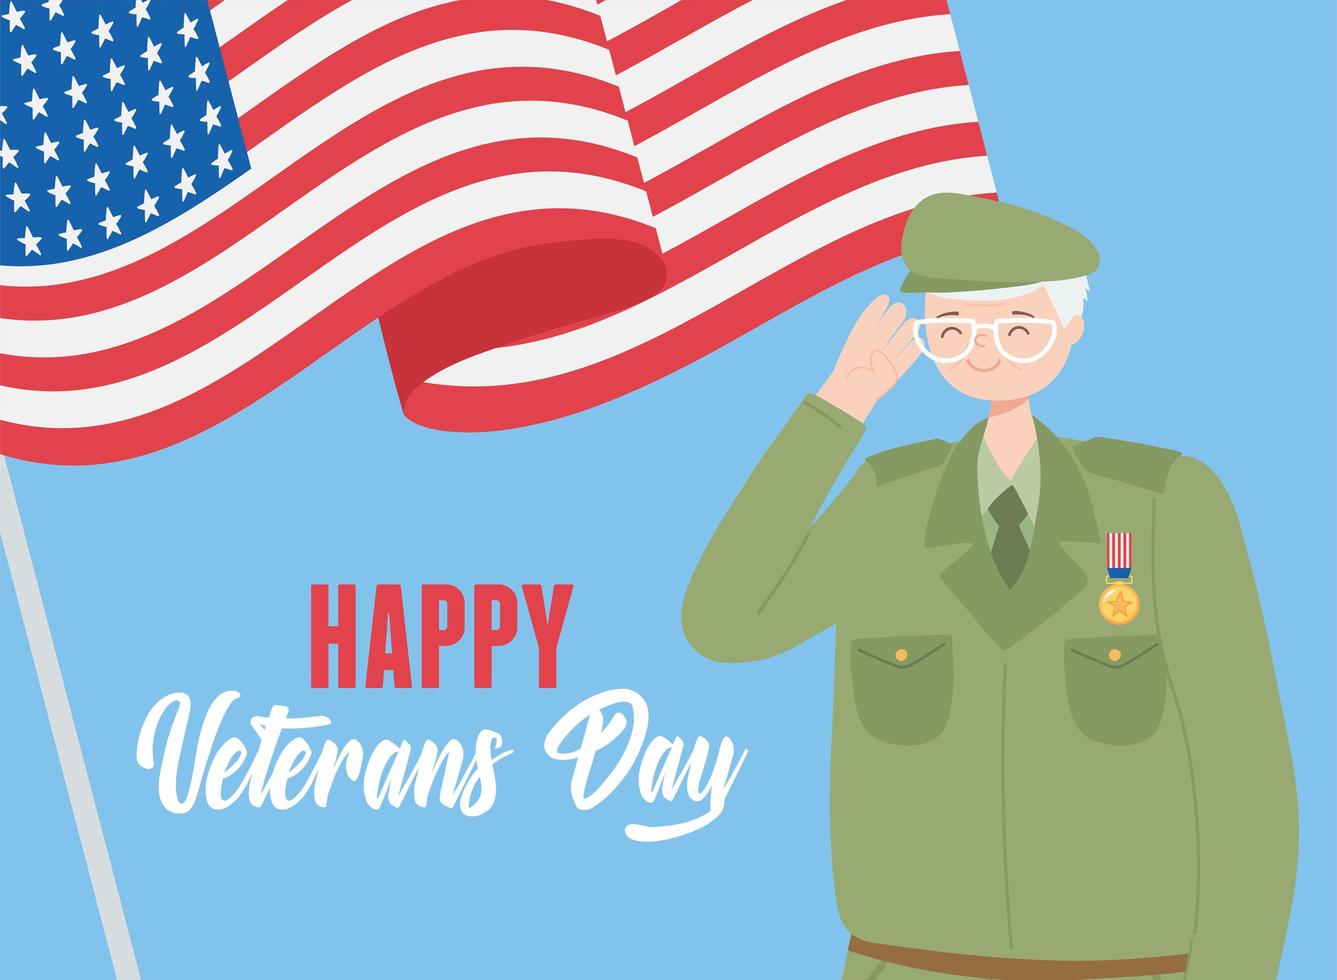 happy veterans day, US military armed forces soldier character and waving american flag vector